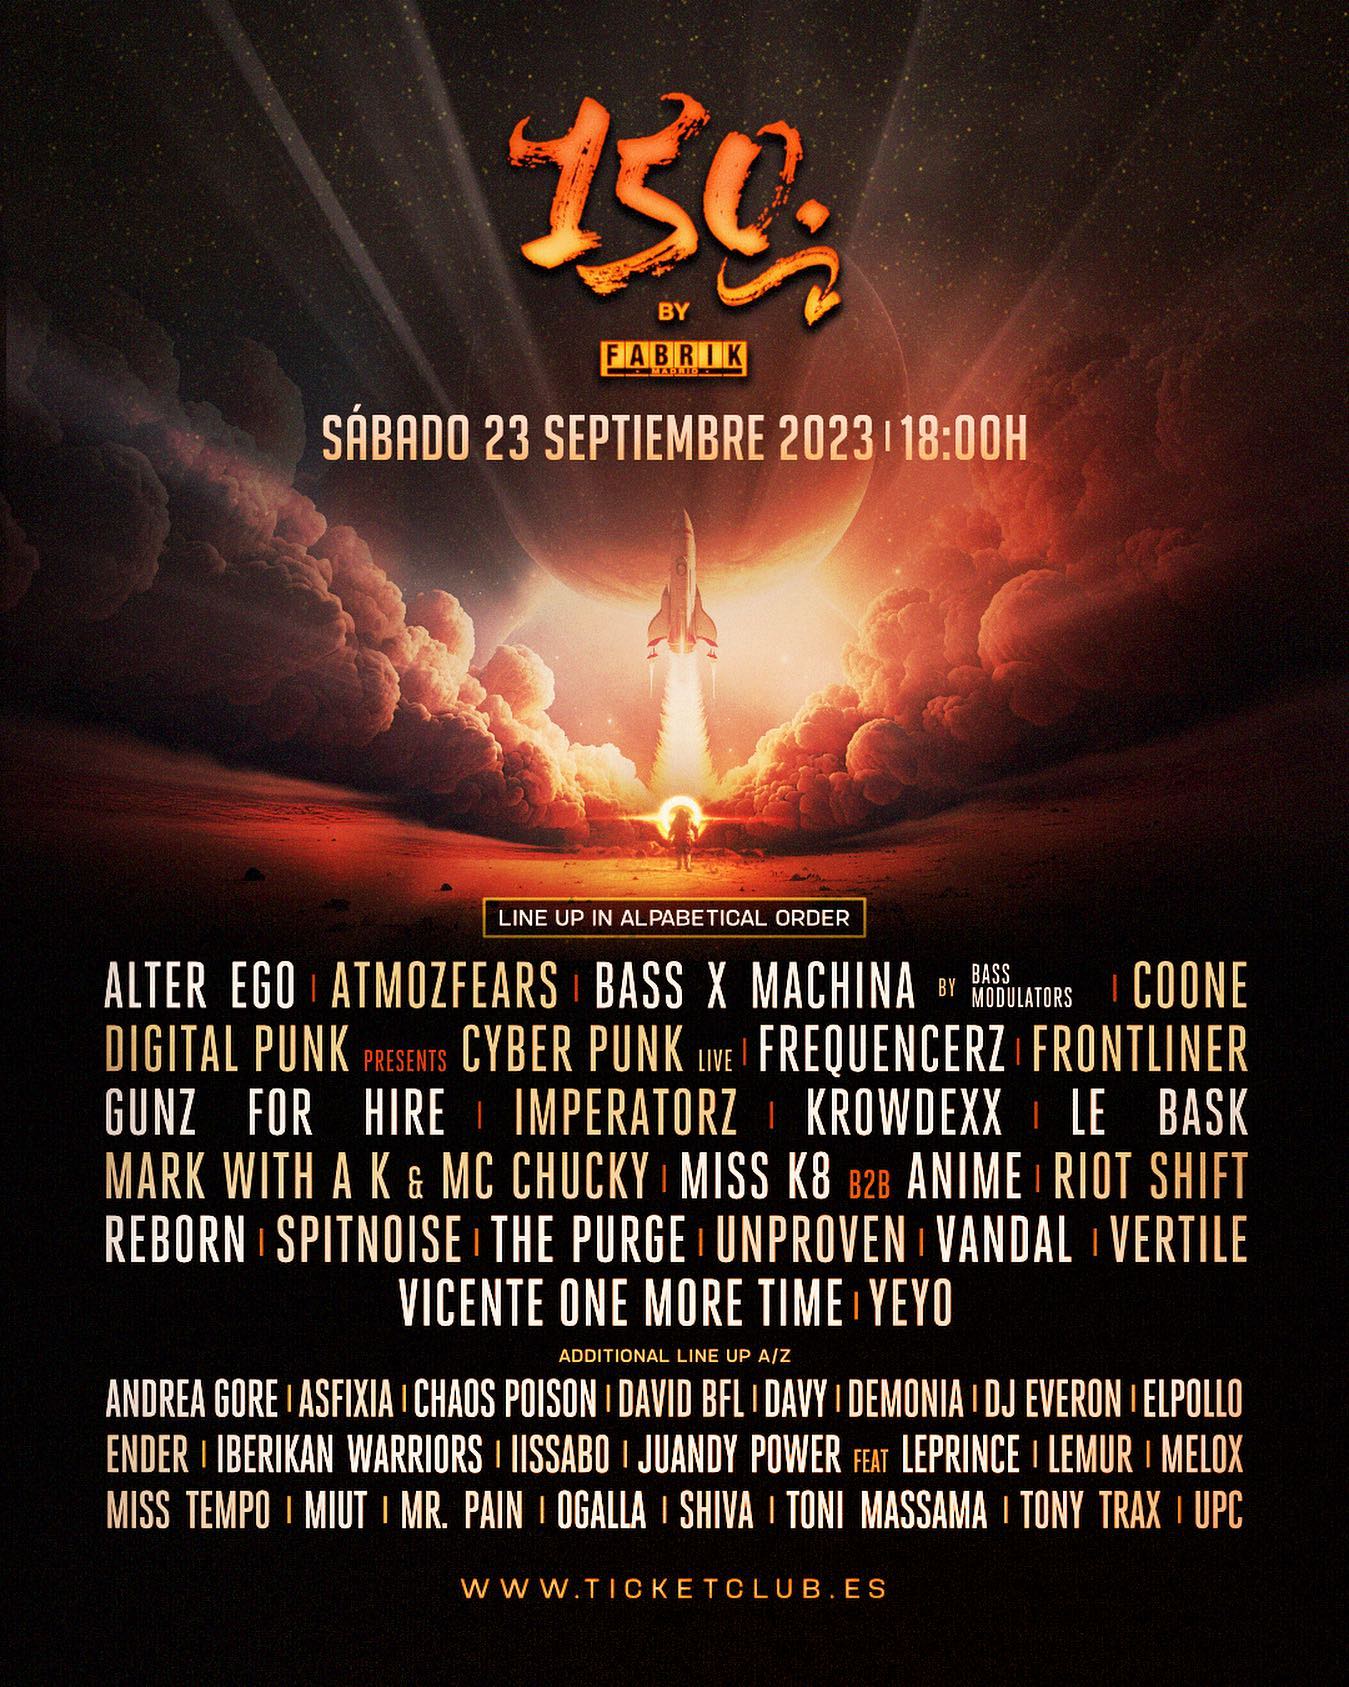 150 "The Opening" - Cartel completo